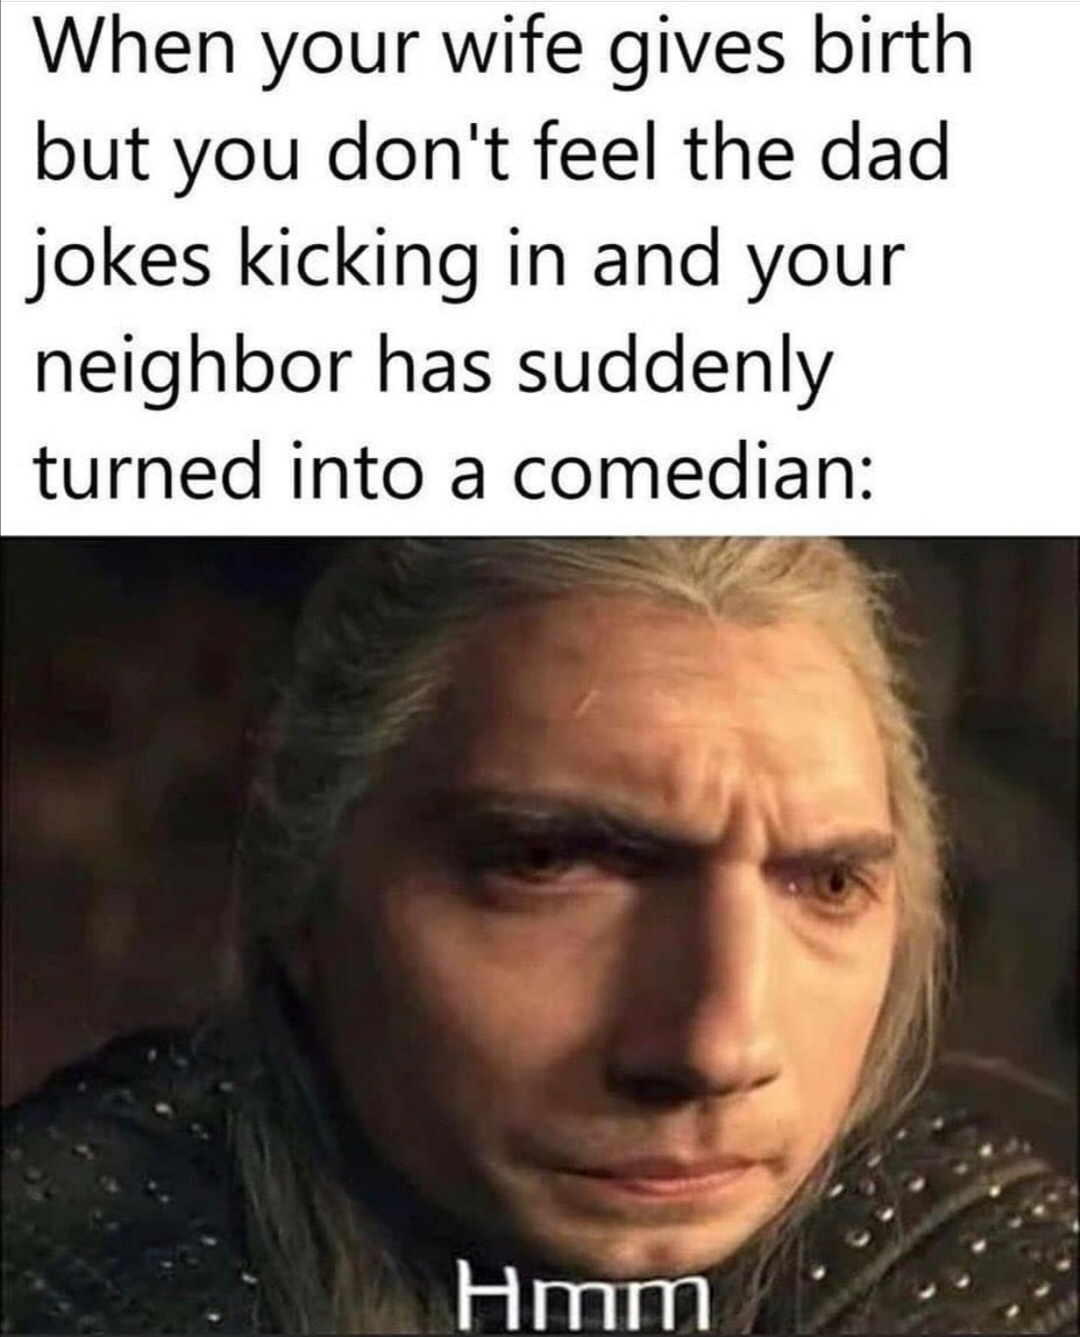 memes funny - When your wife gives birth but you don't feel the dad jokes kicking in and your neighbor has suddenly turned into a comedian Hmm